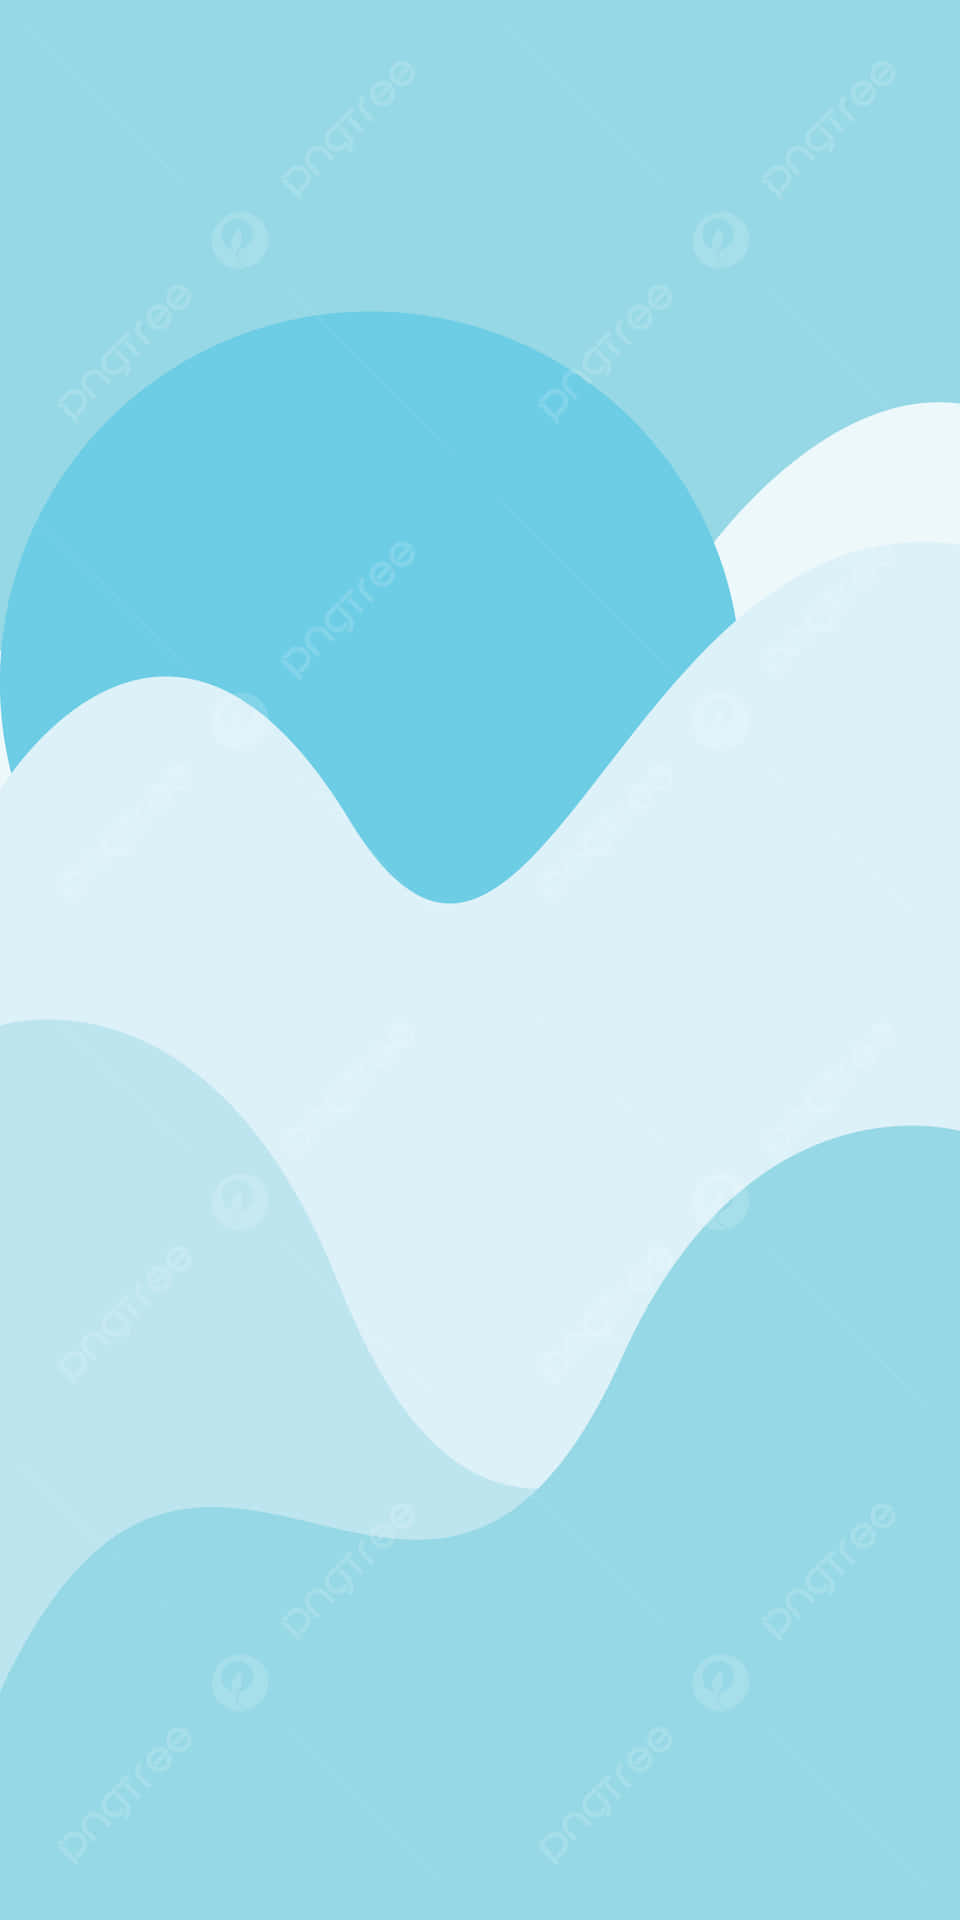 Download A charming and vibrant pastel blue solid Wallpaper